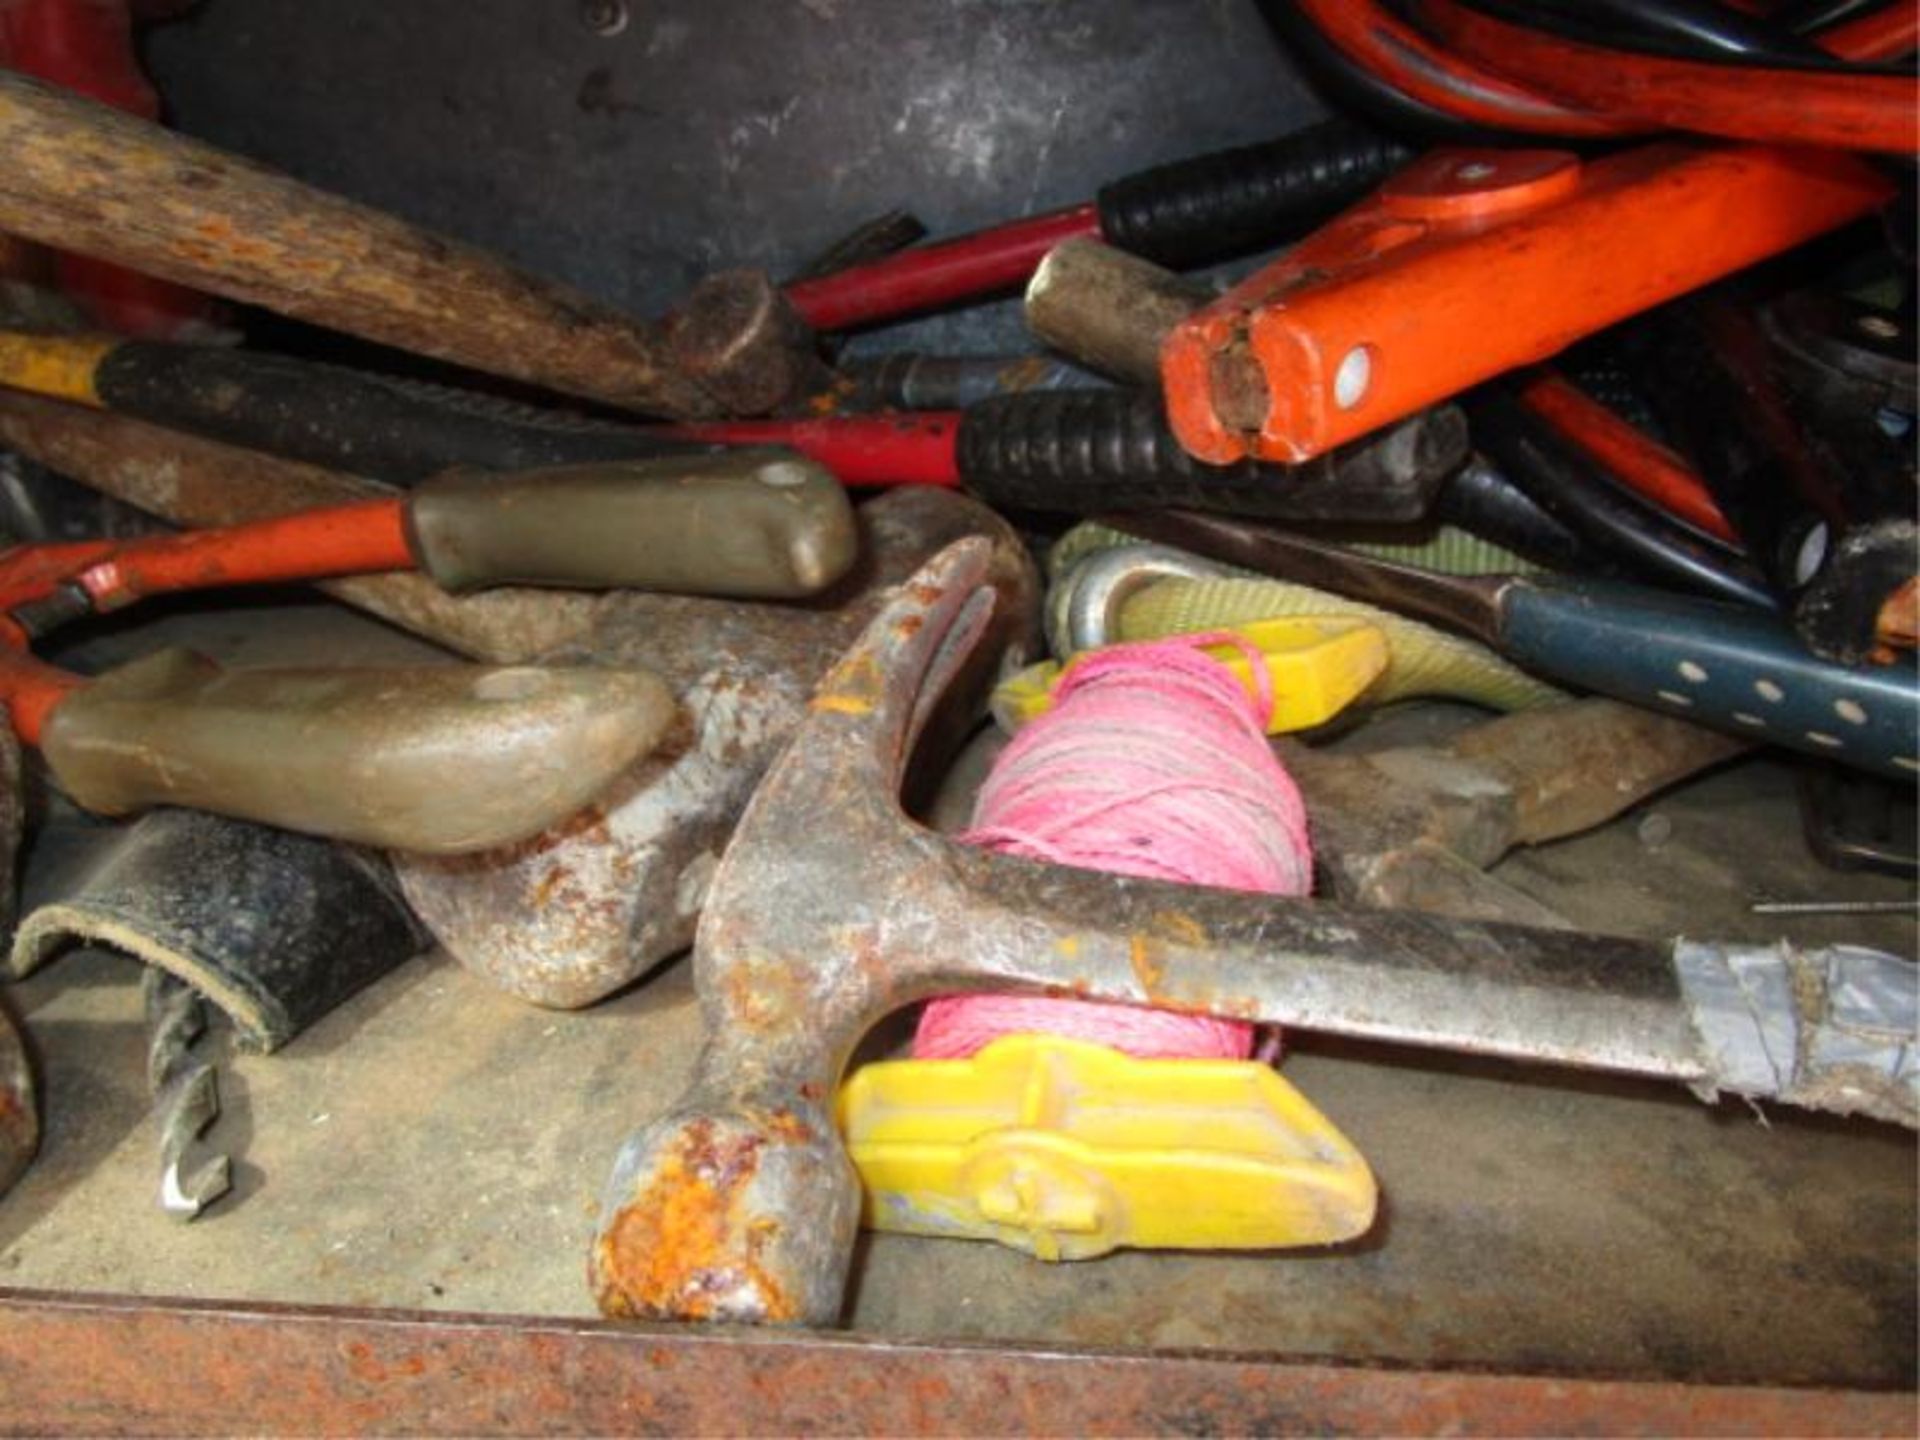 Top Shelf Lot - Asst. Hammers, Pipe Wrenches, Tie Down, Wedges, Jumper Cables - Image 4 of 5